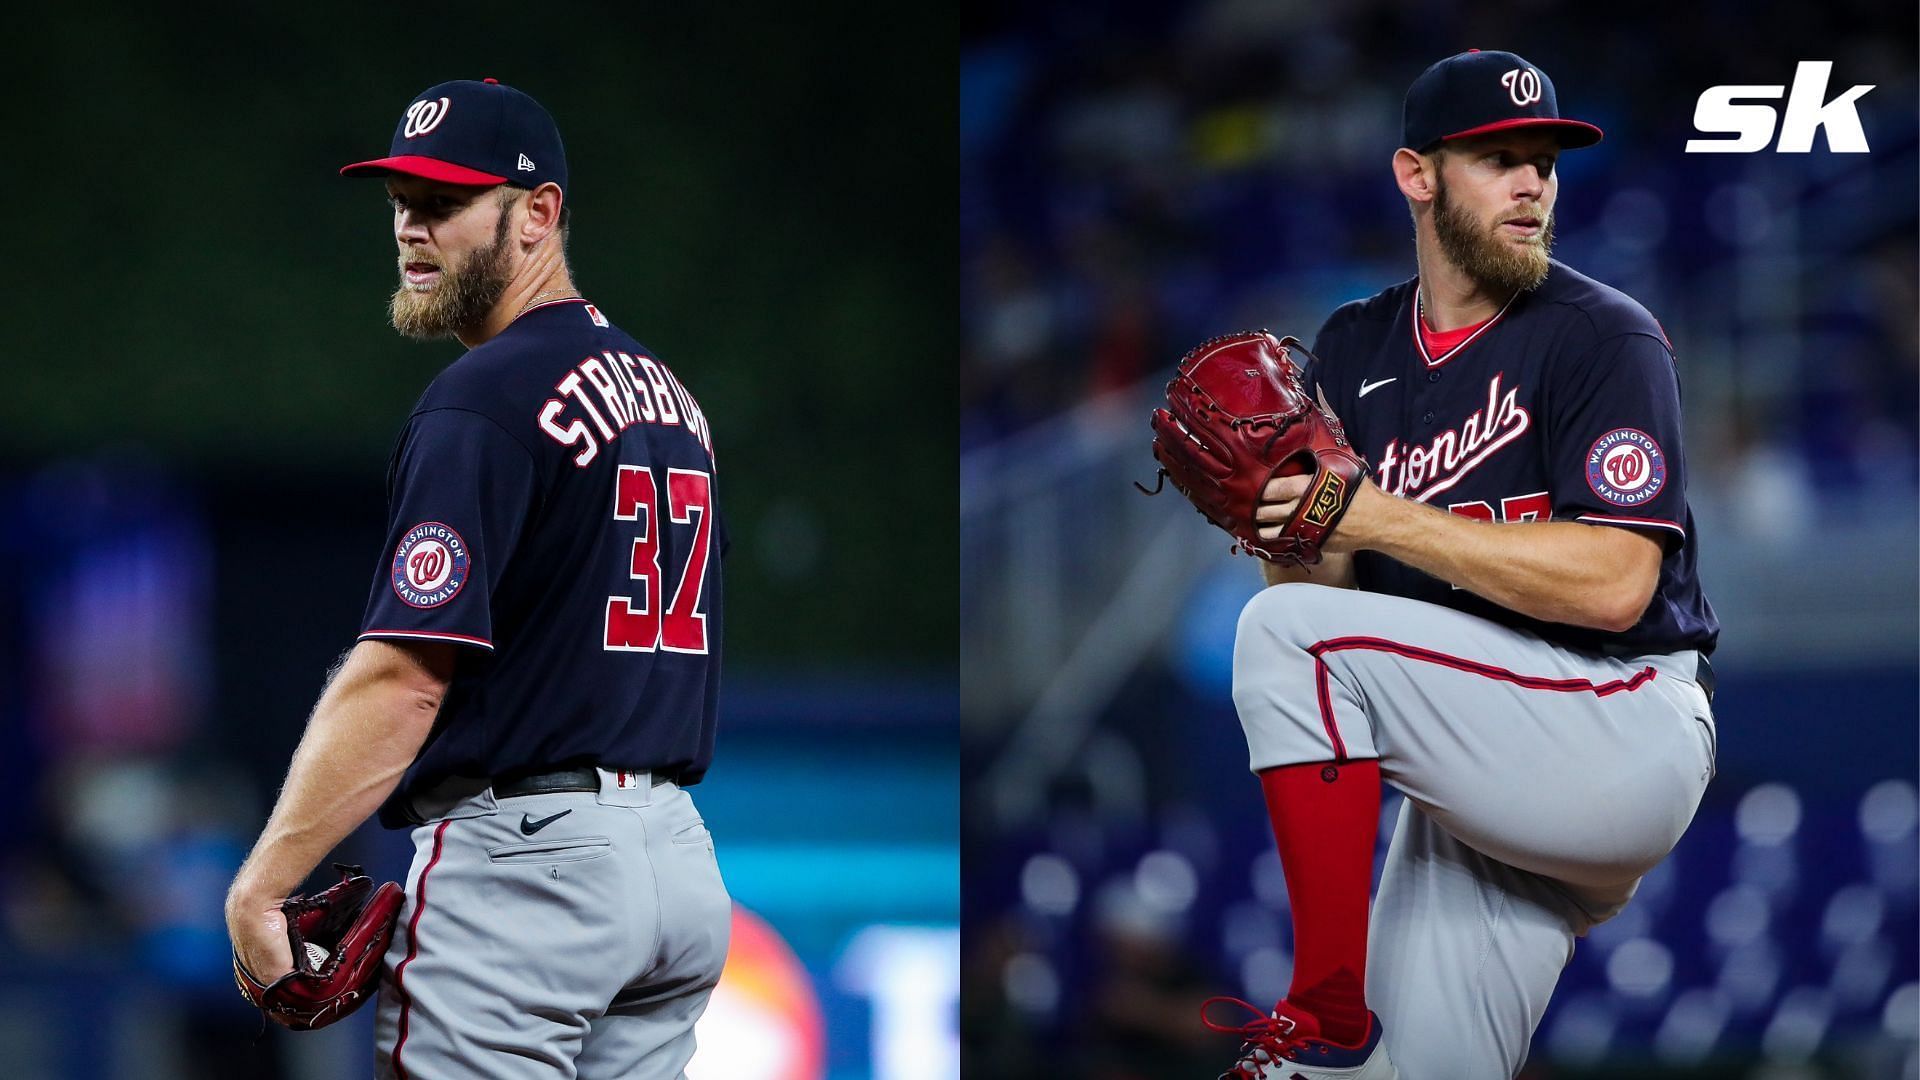 Washington Nationals legend Stephen Strasburg has announced his retirement from the MLB